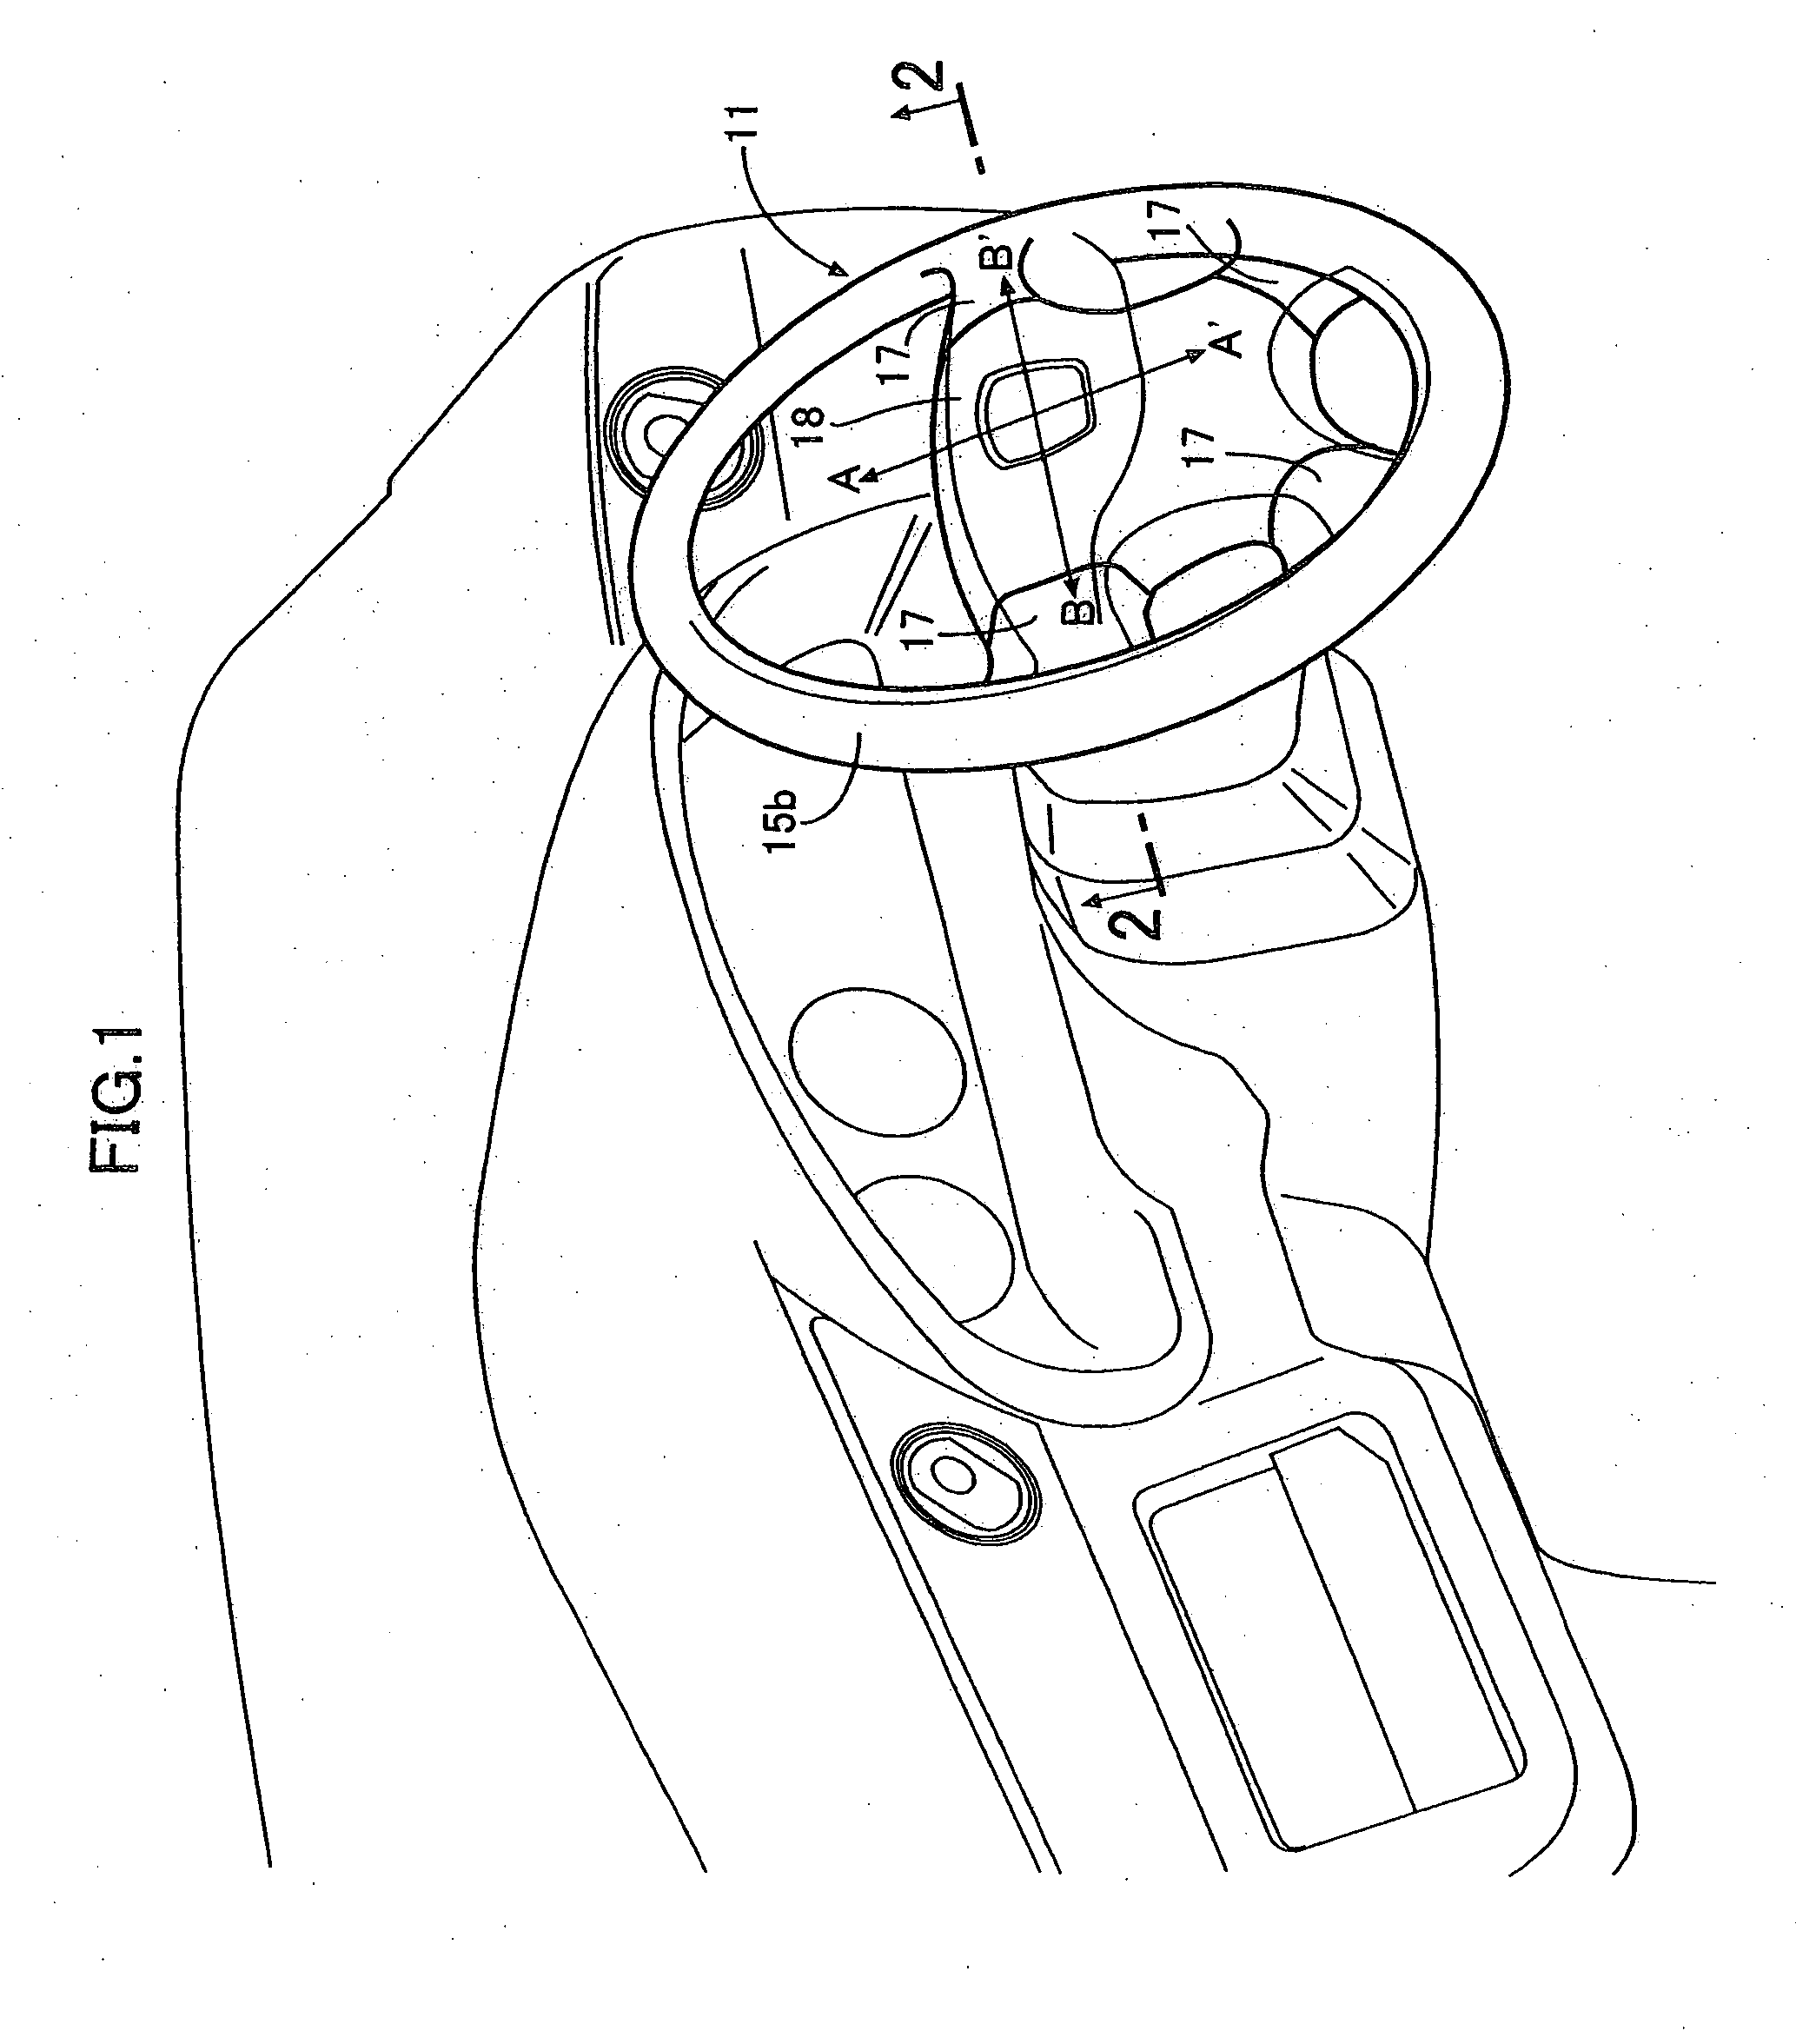 Vibration Reducing Structure for steering wheel